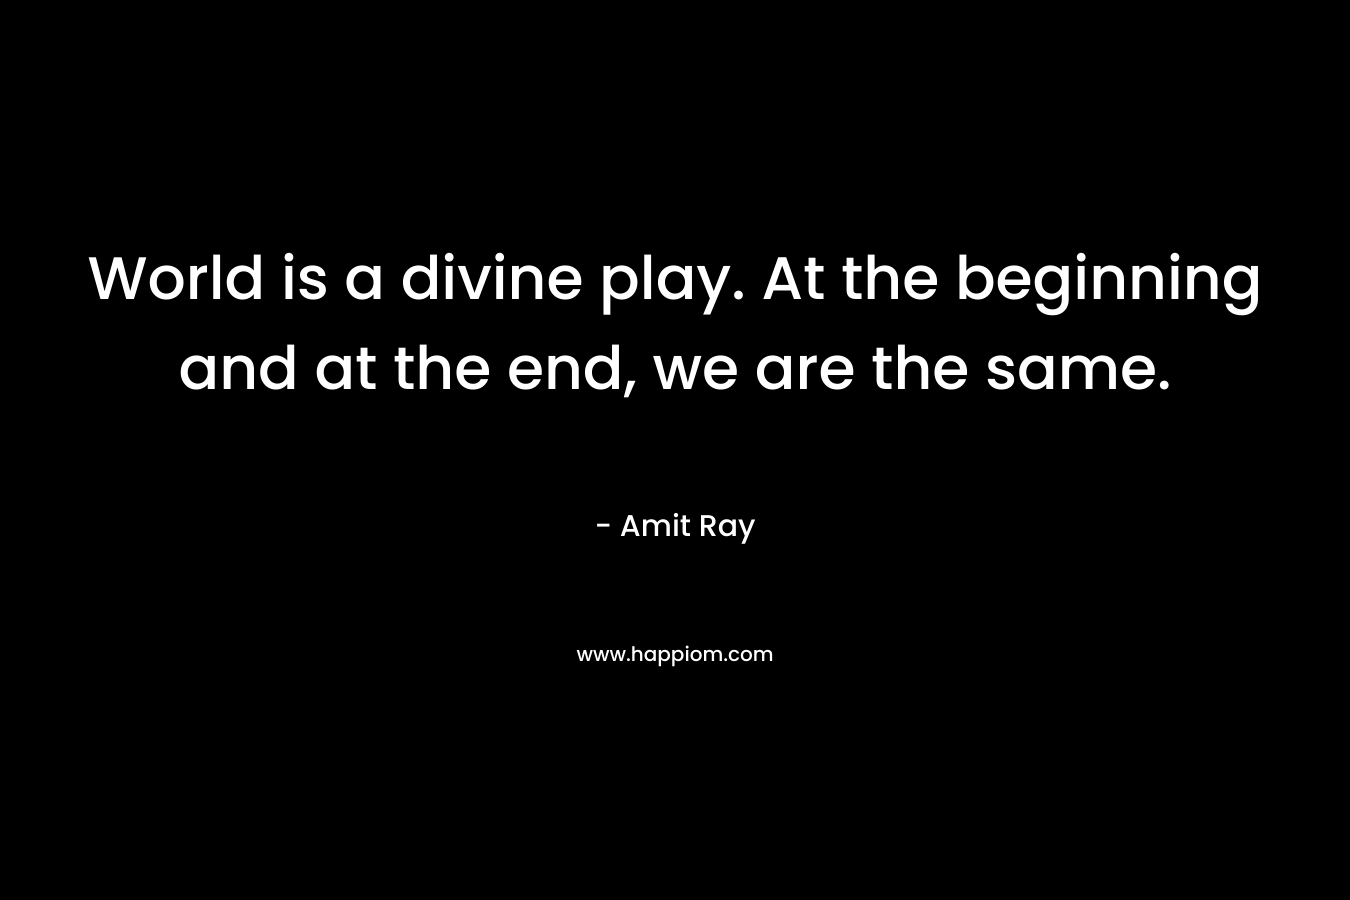 World is a divine play. At the beginning and at the end, we are the same.